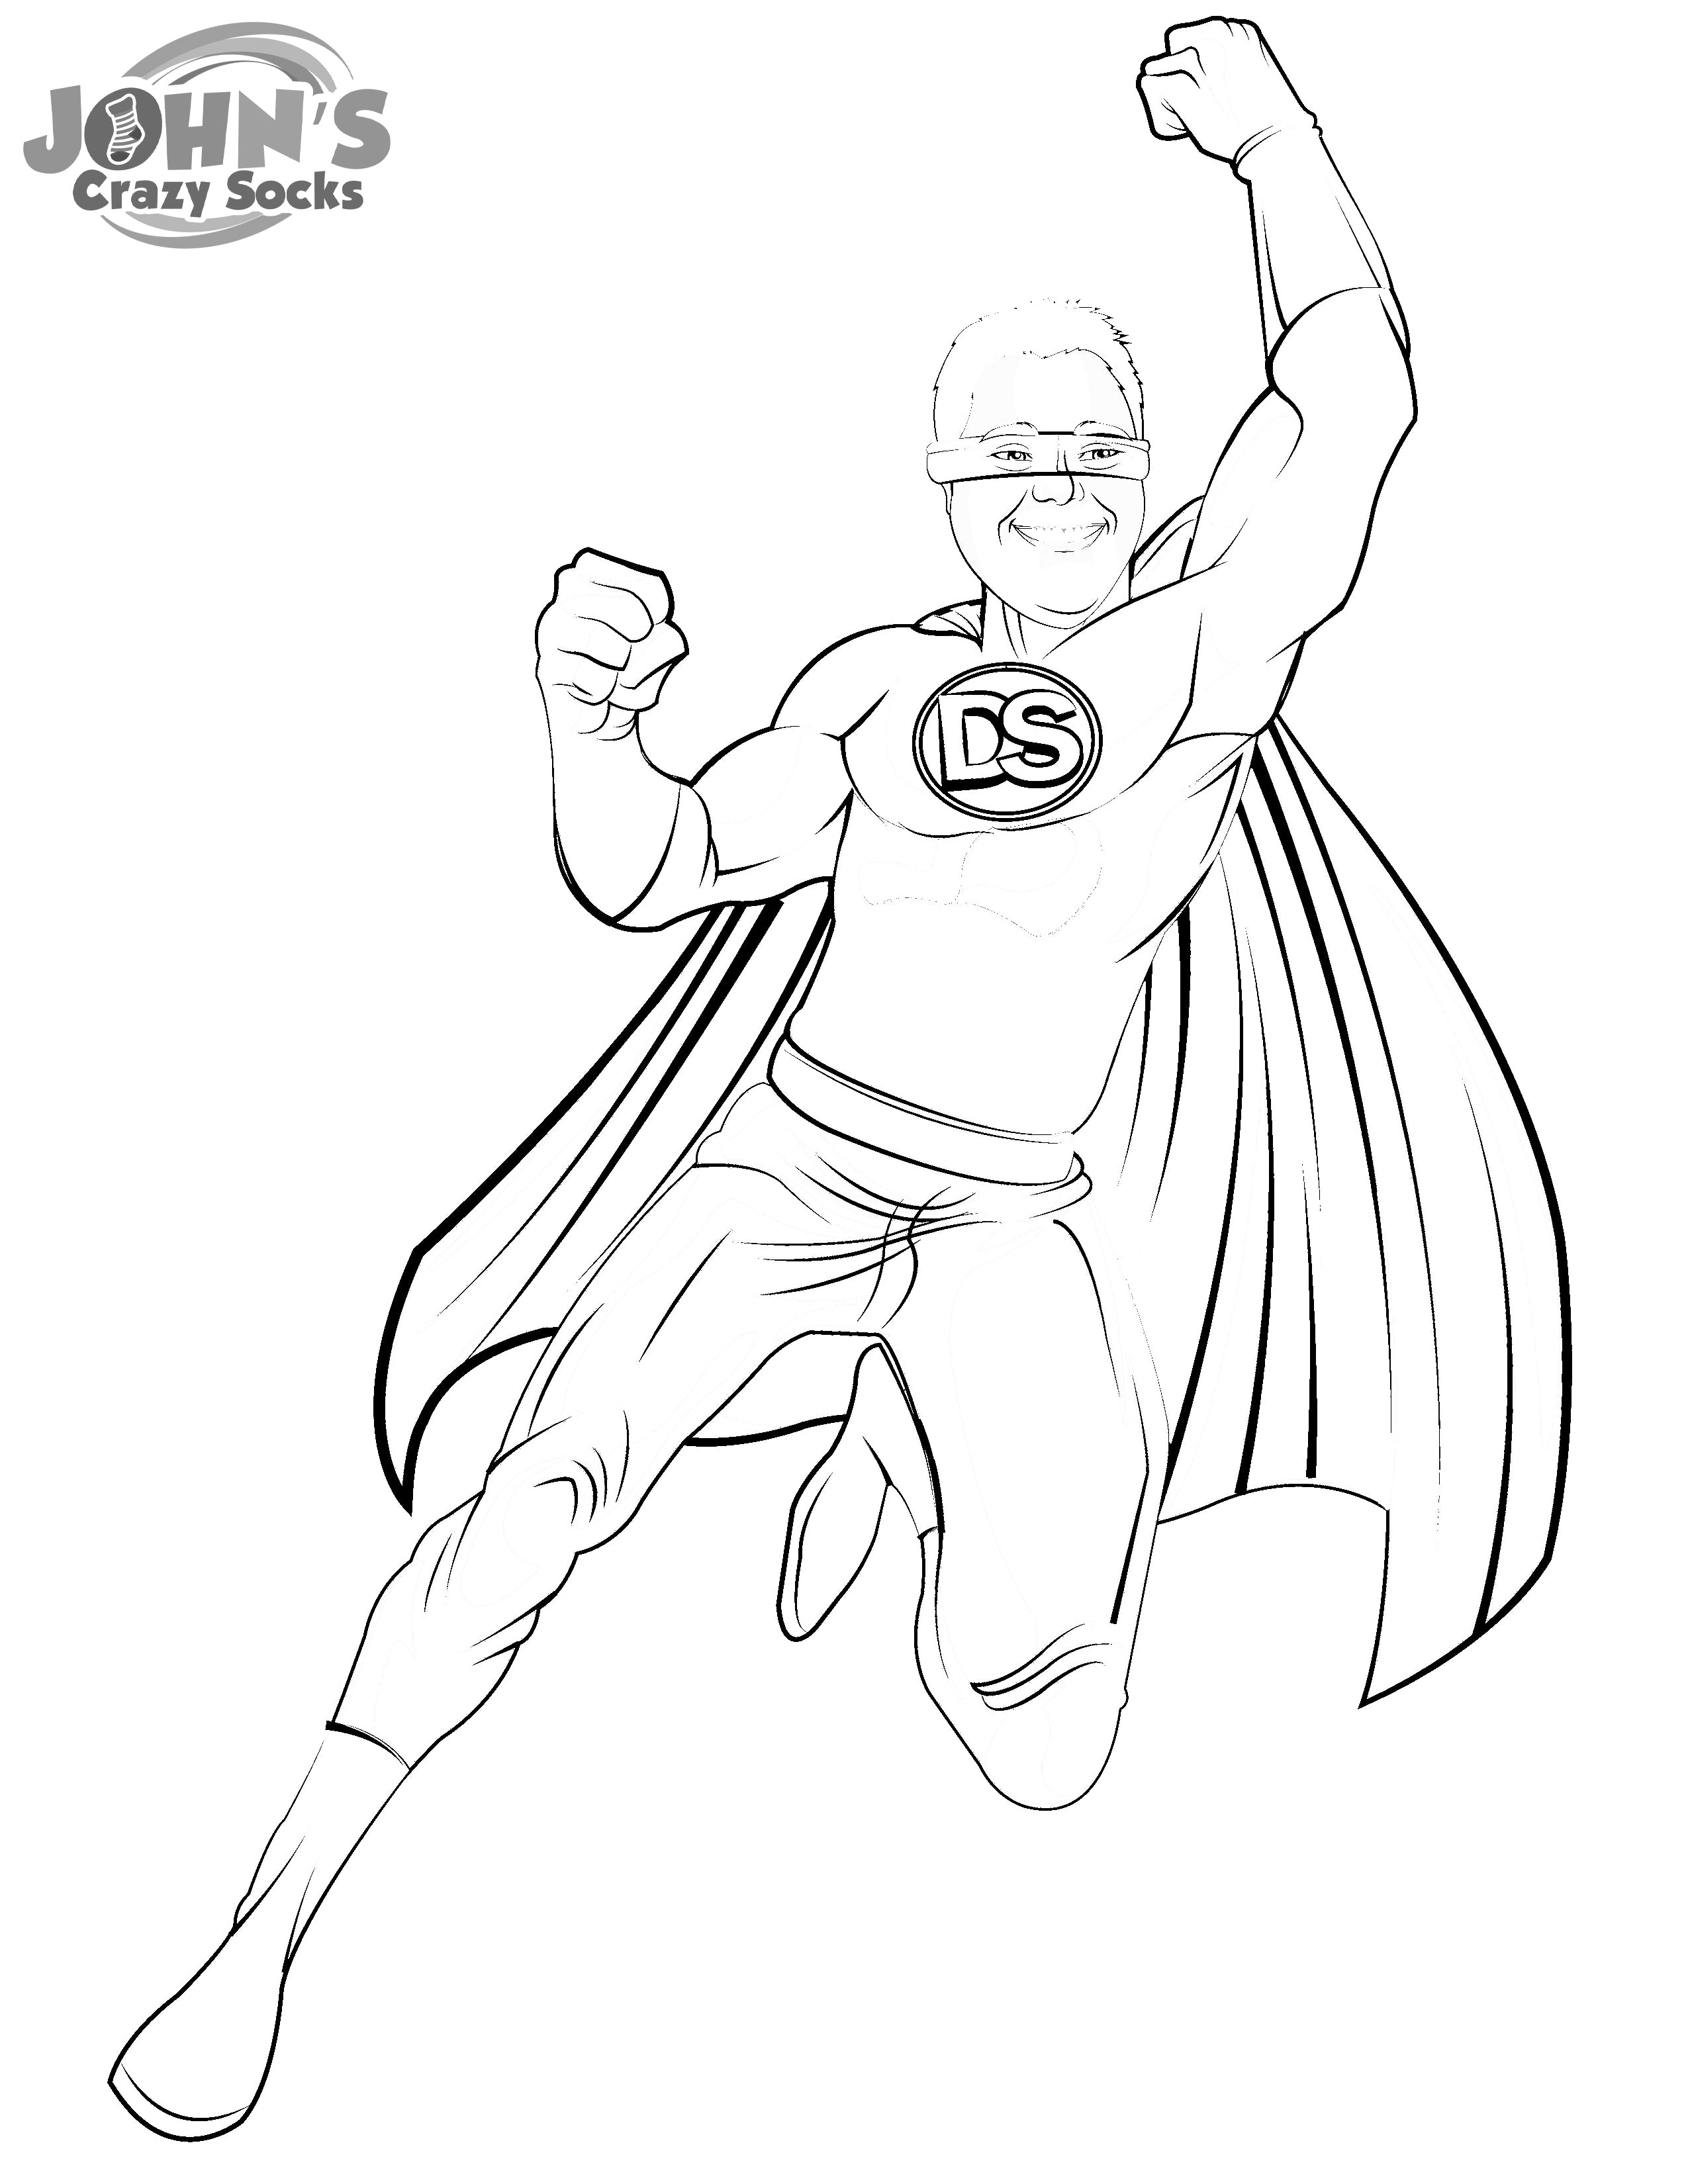 Color Your Own Down Syndrome Superhero - John's Crazy Socks